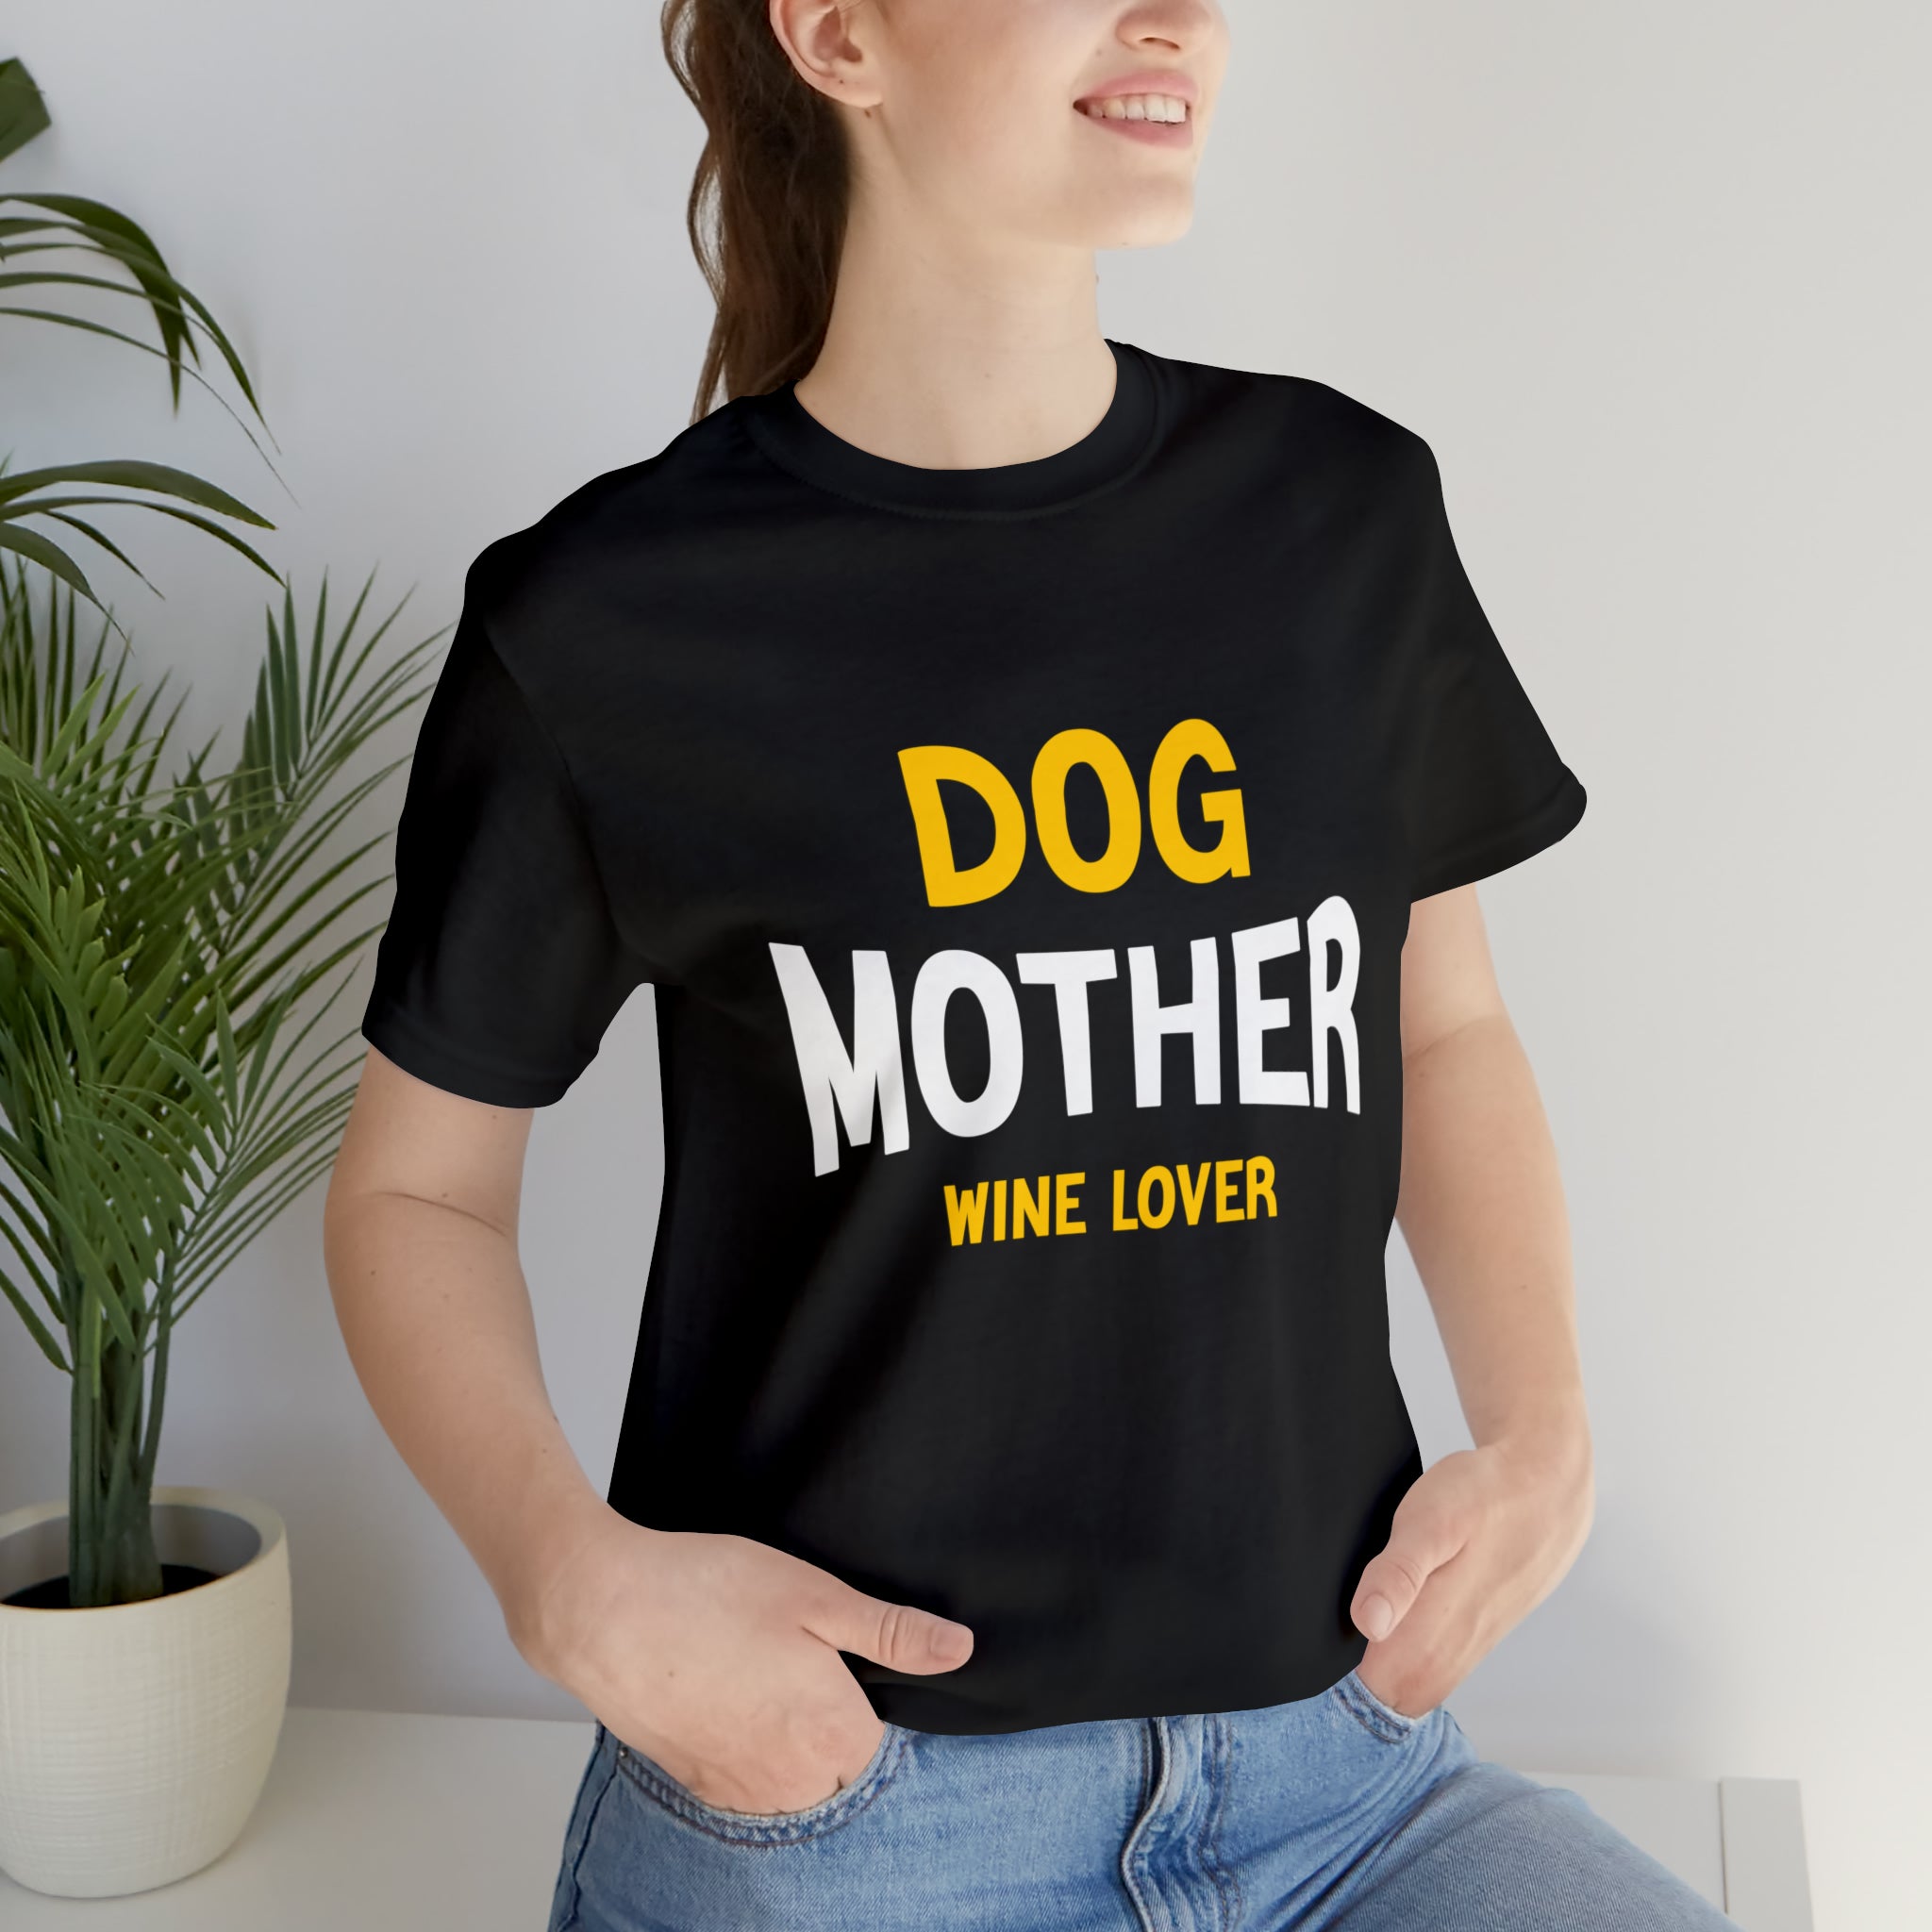 A woman wearing a black Dog Mother Wine Lover tee-shirt.